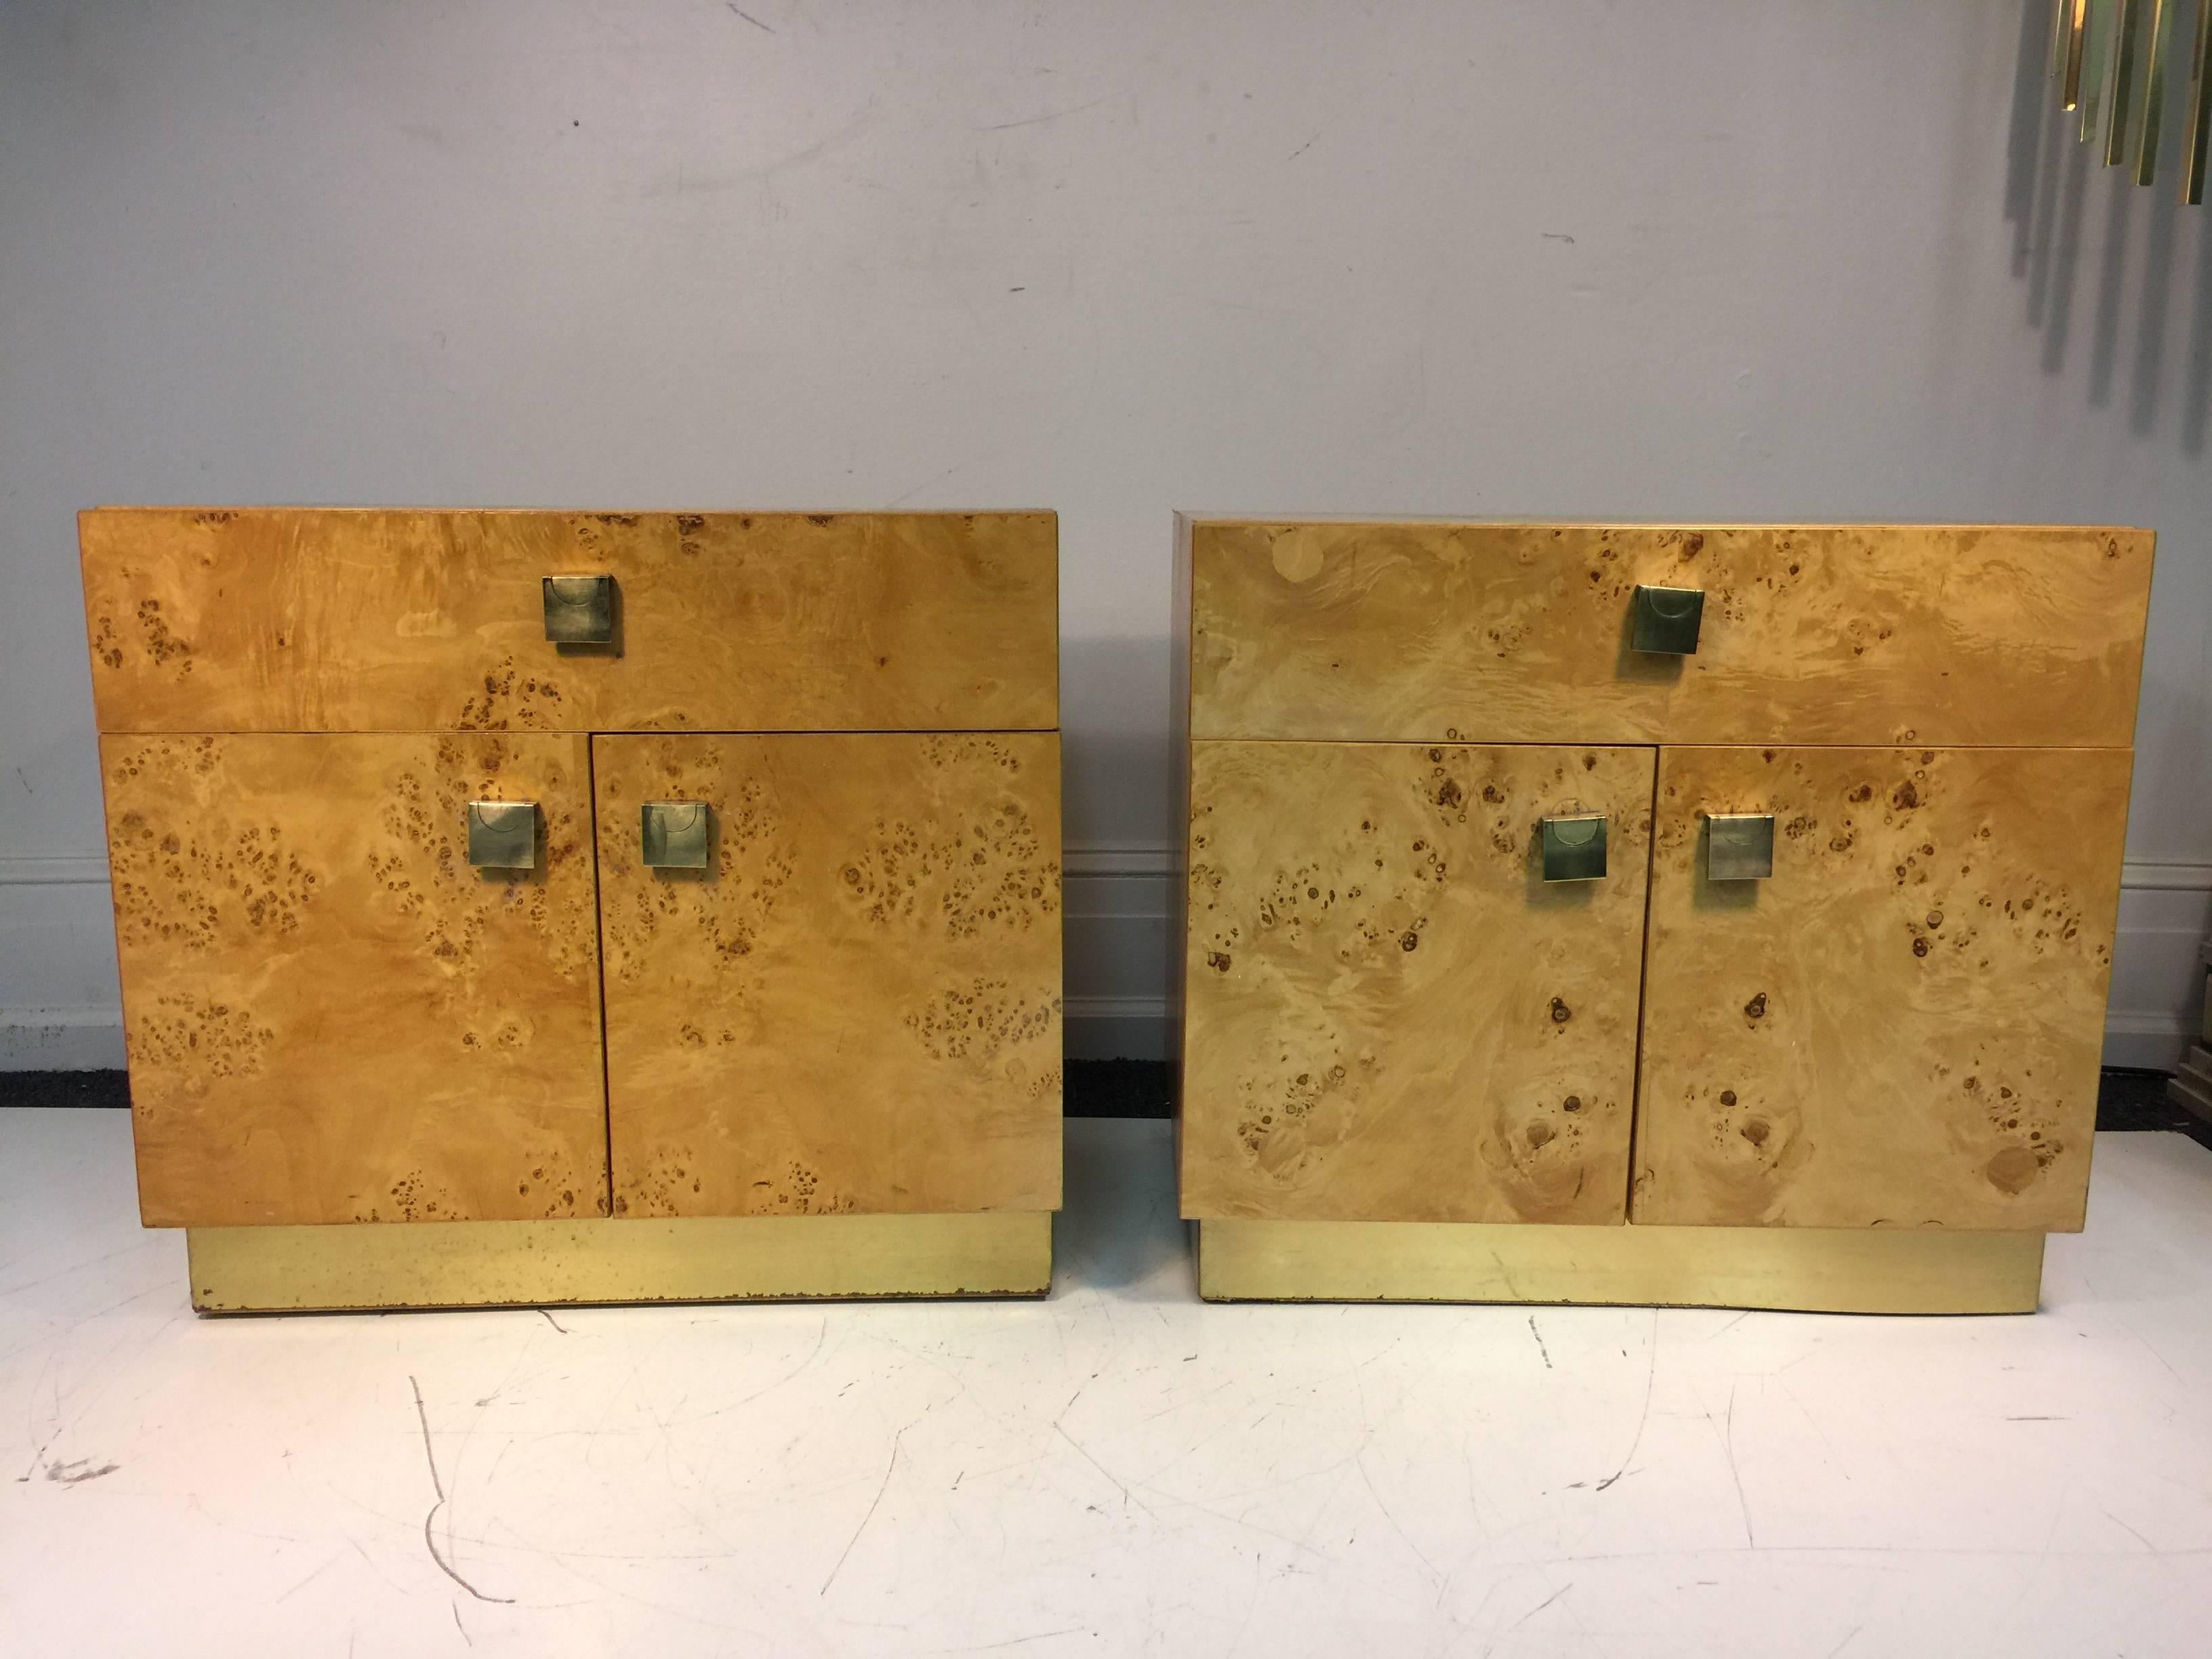 A beautiful pair of burl wood nightstands with original brass hardware by Milo Baughman for Founders Furniture by Thomasville, circa 1970. Good vintage condition with age appropriate wear. Some light scratches on the tops.